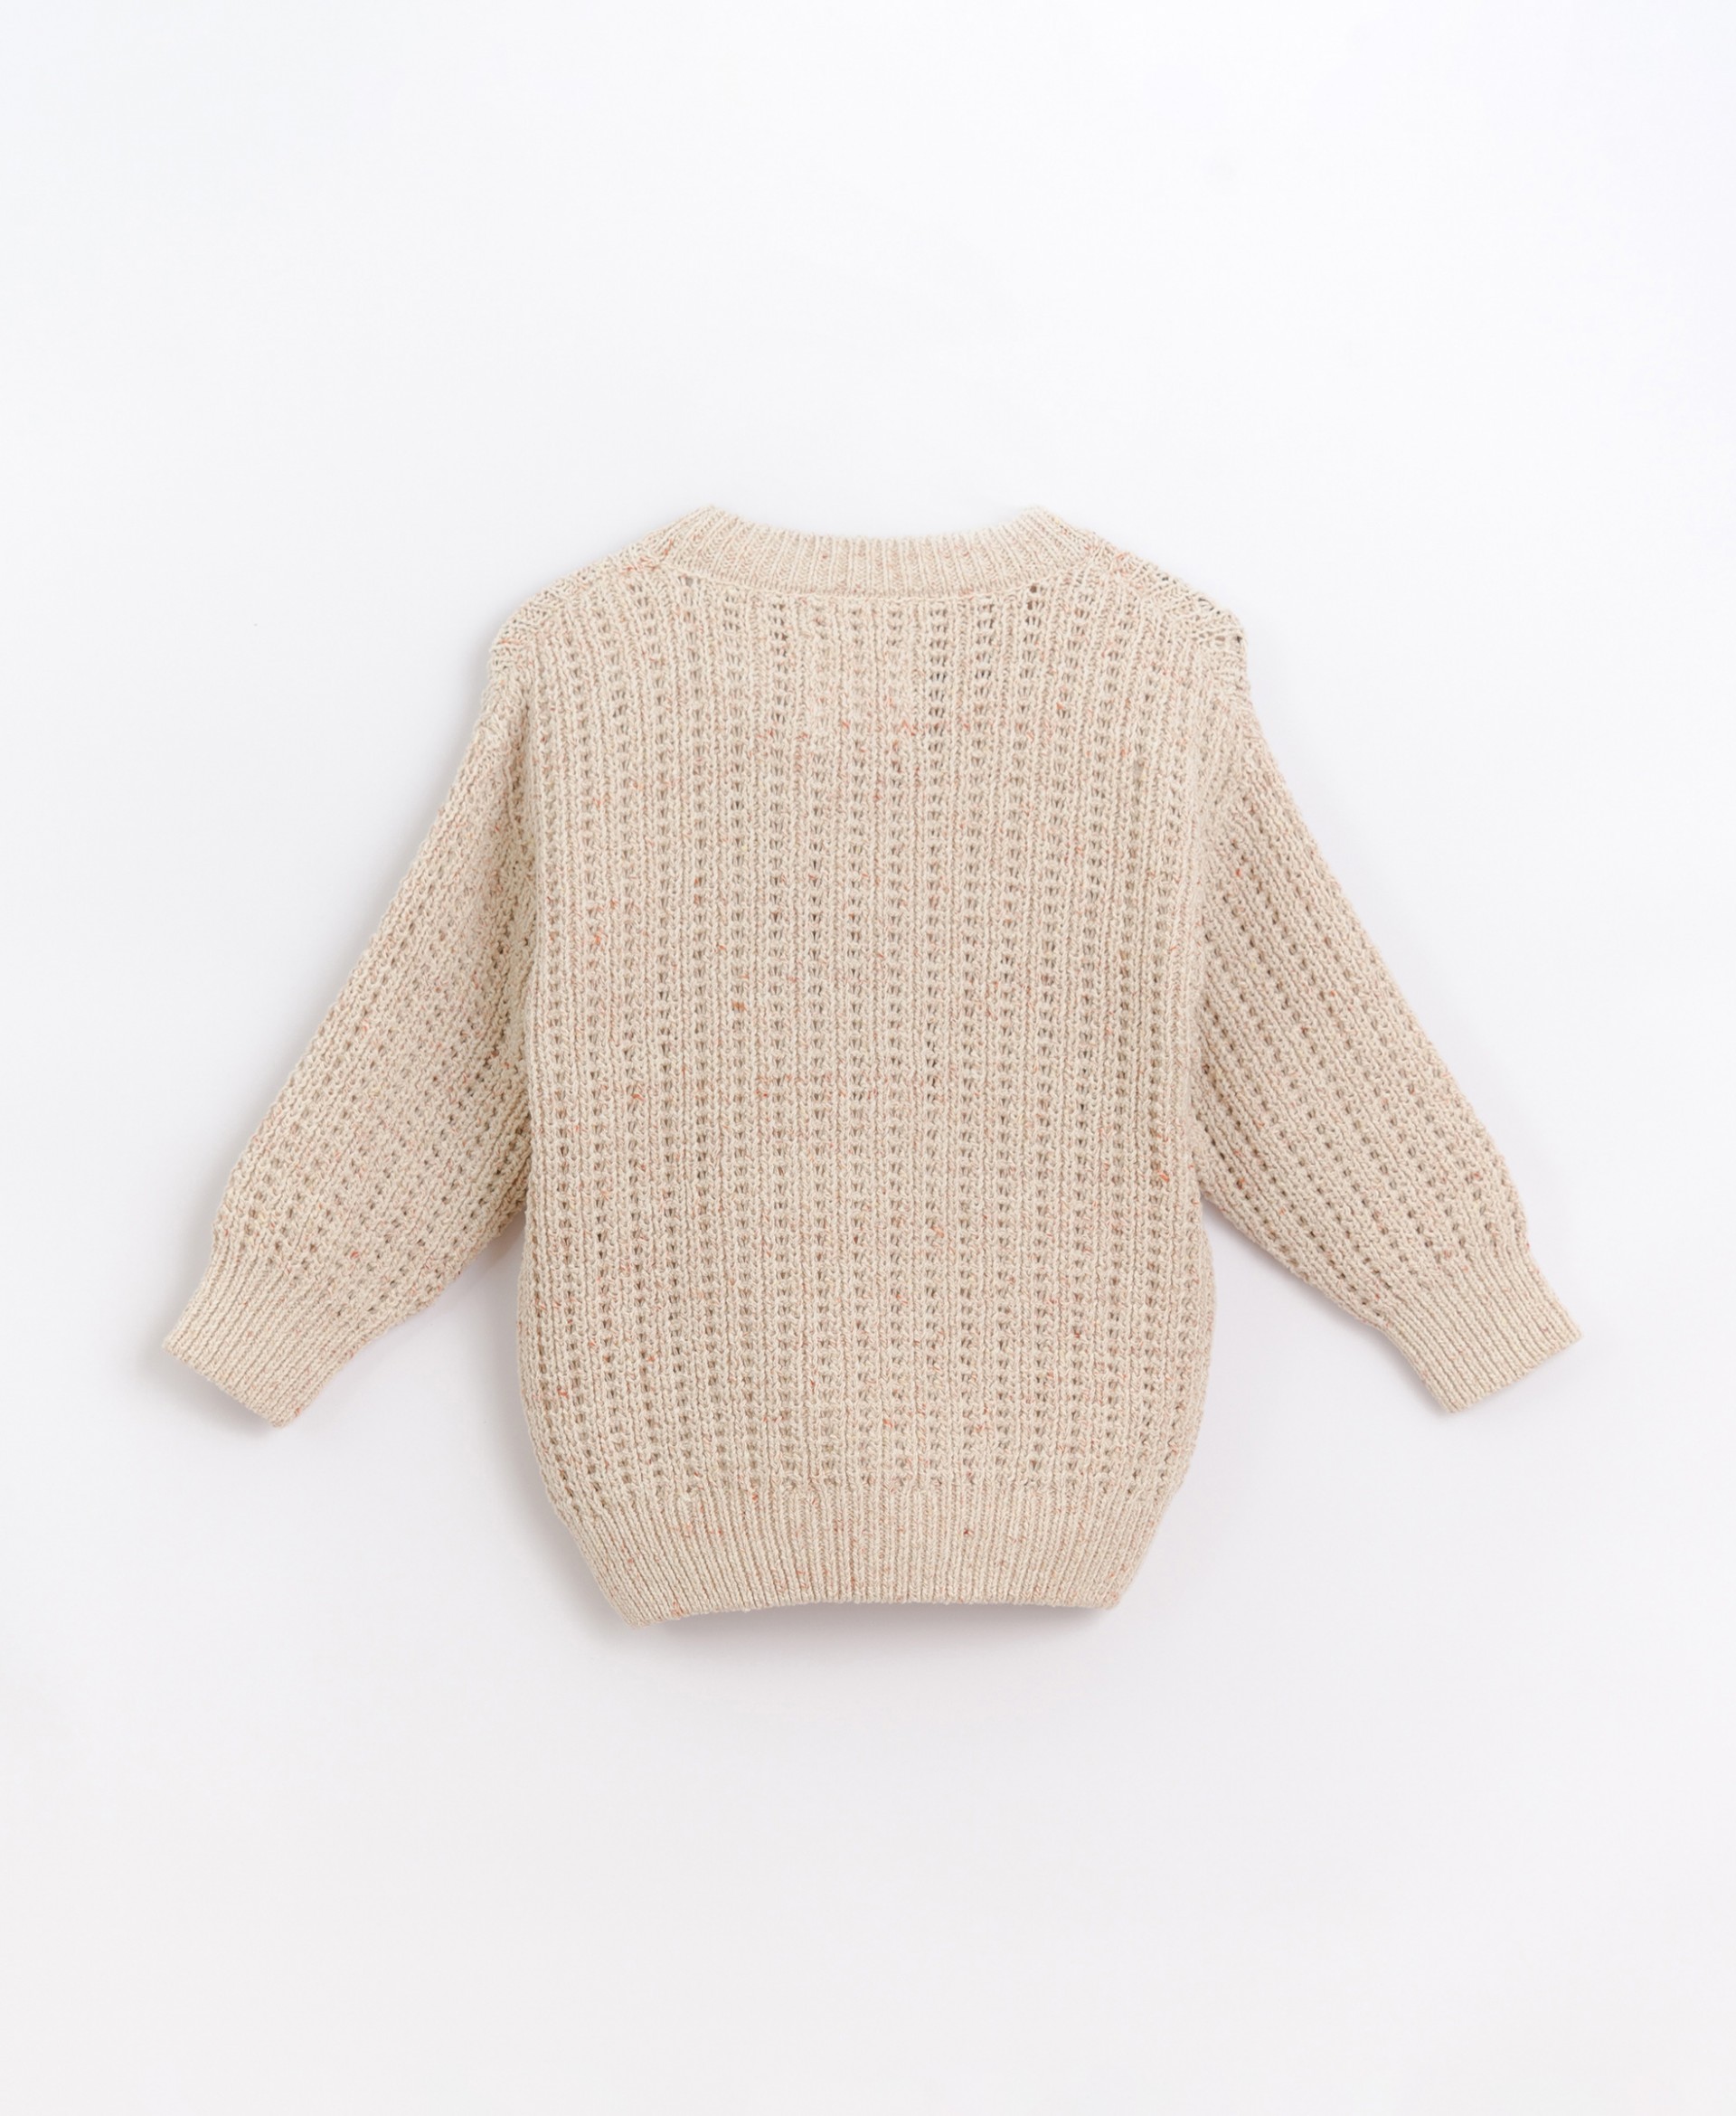 Camisola tricot | Basketry